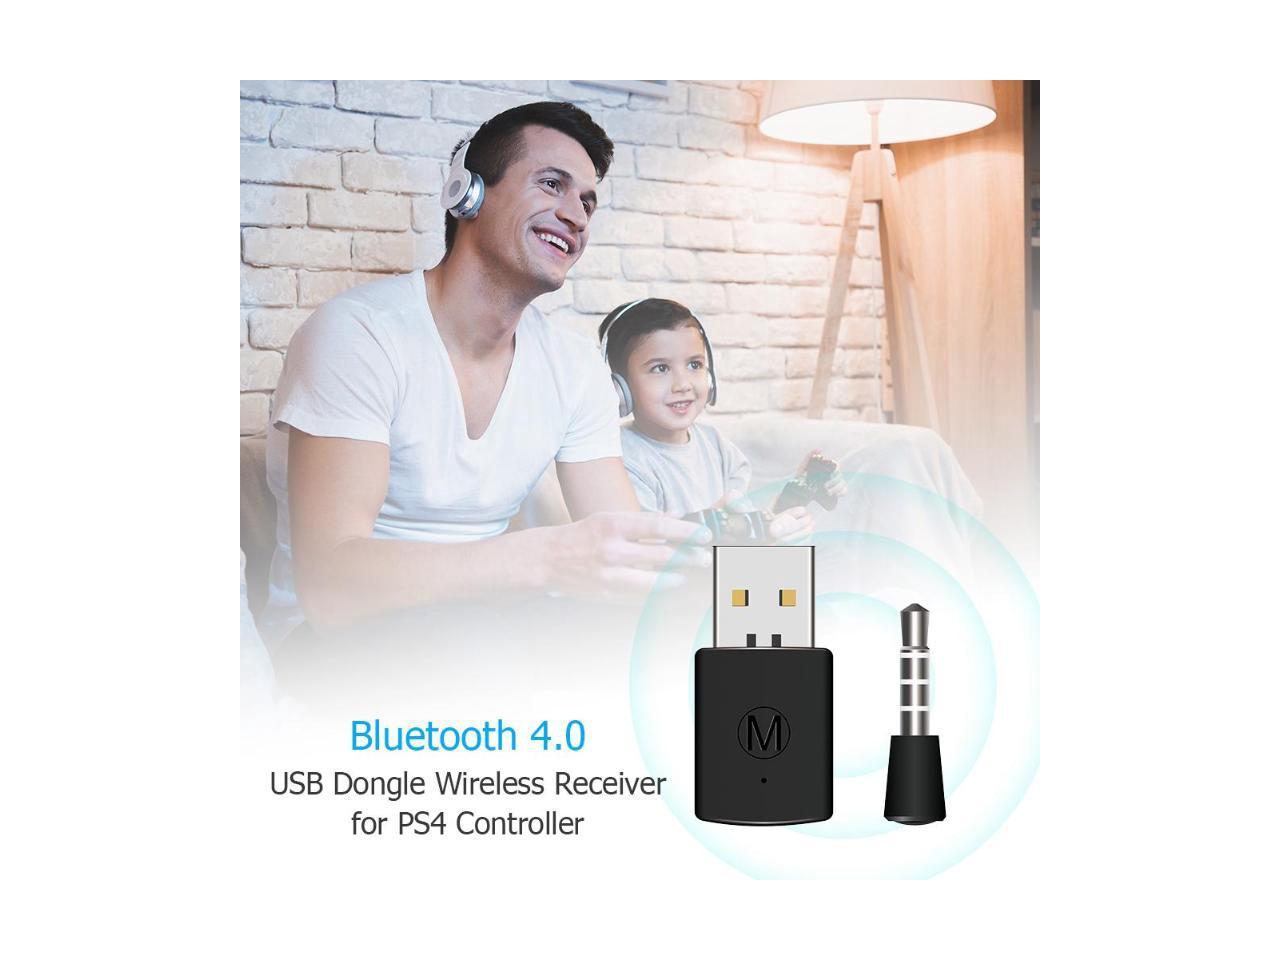 3.5mm Bluetooth 4.0 Dongle USB Adapter Receiver for PS4 Controller Gamepad (1 pcs)